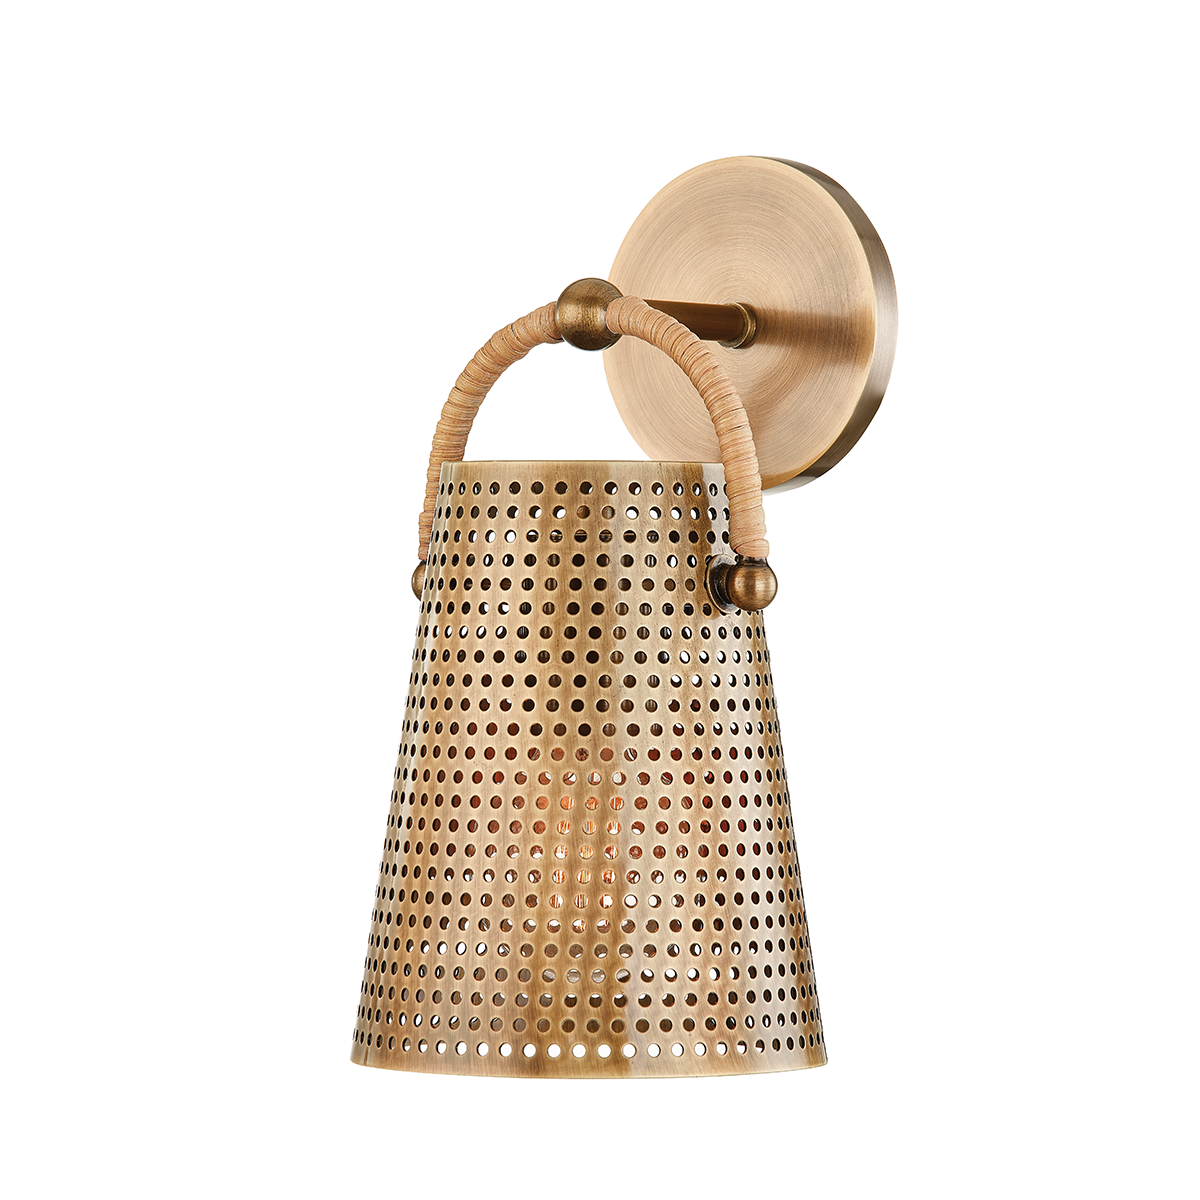 Patina Brass Shade with Wrapped Natural Rattan Arm Wall Sconce